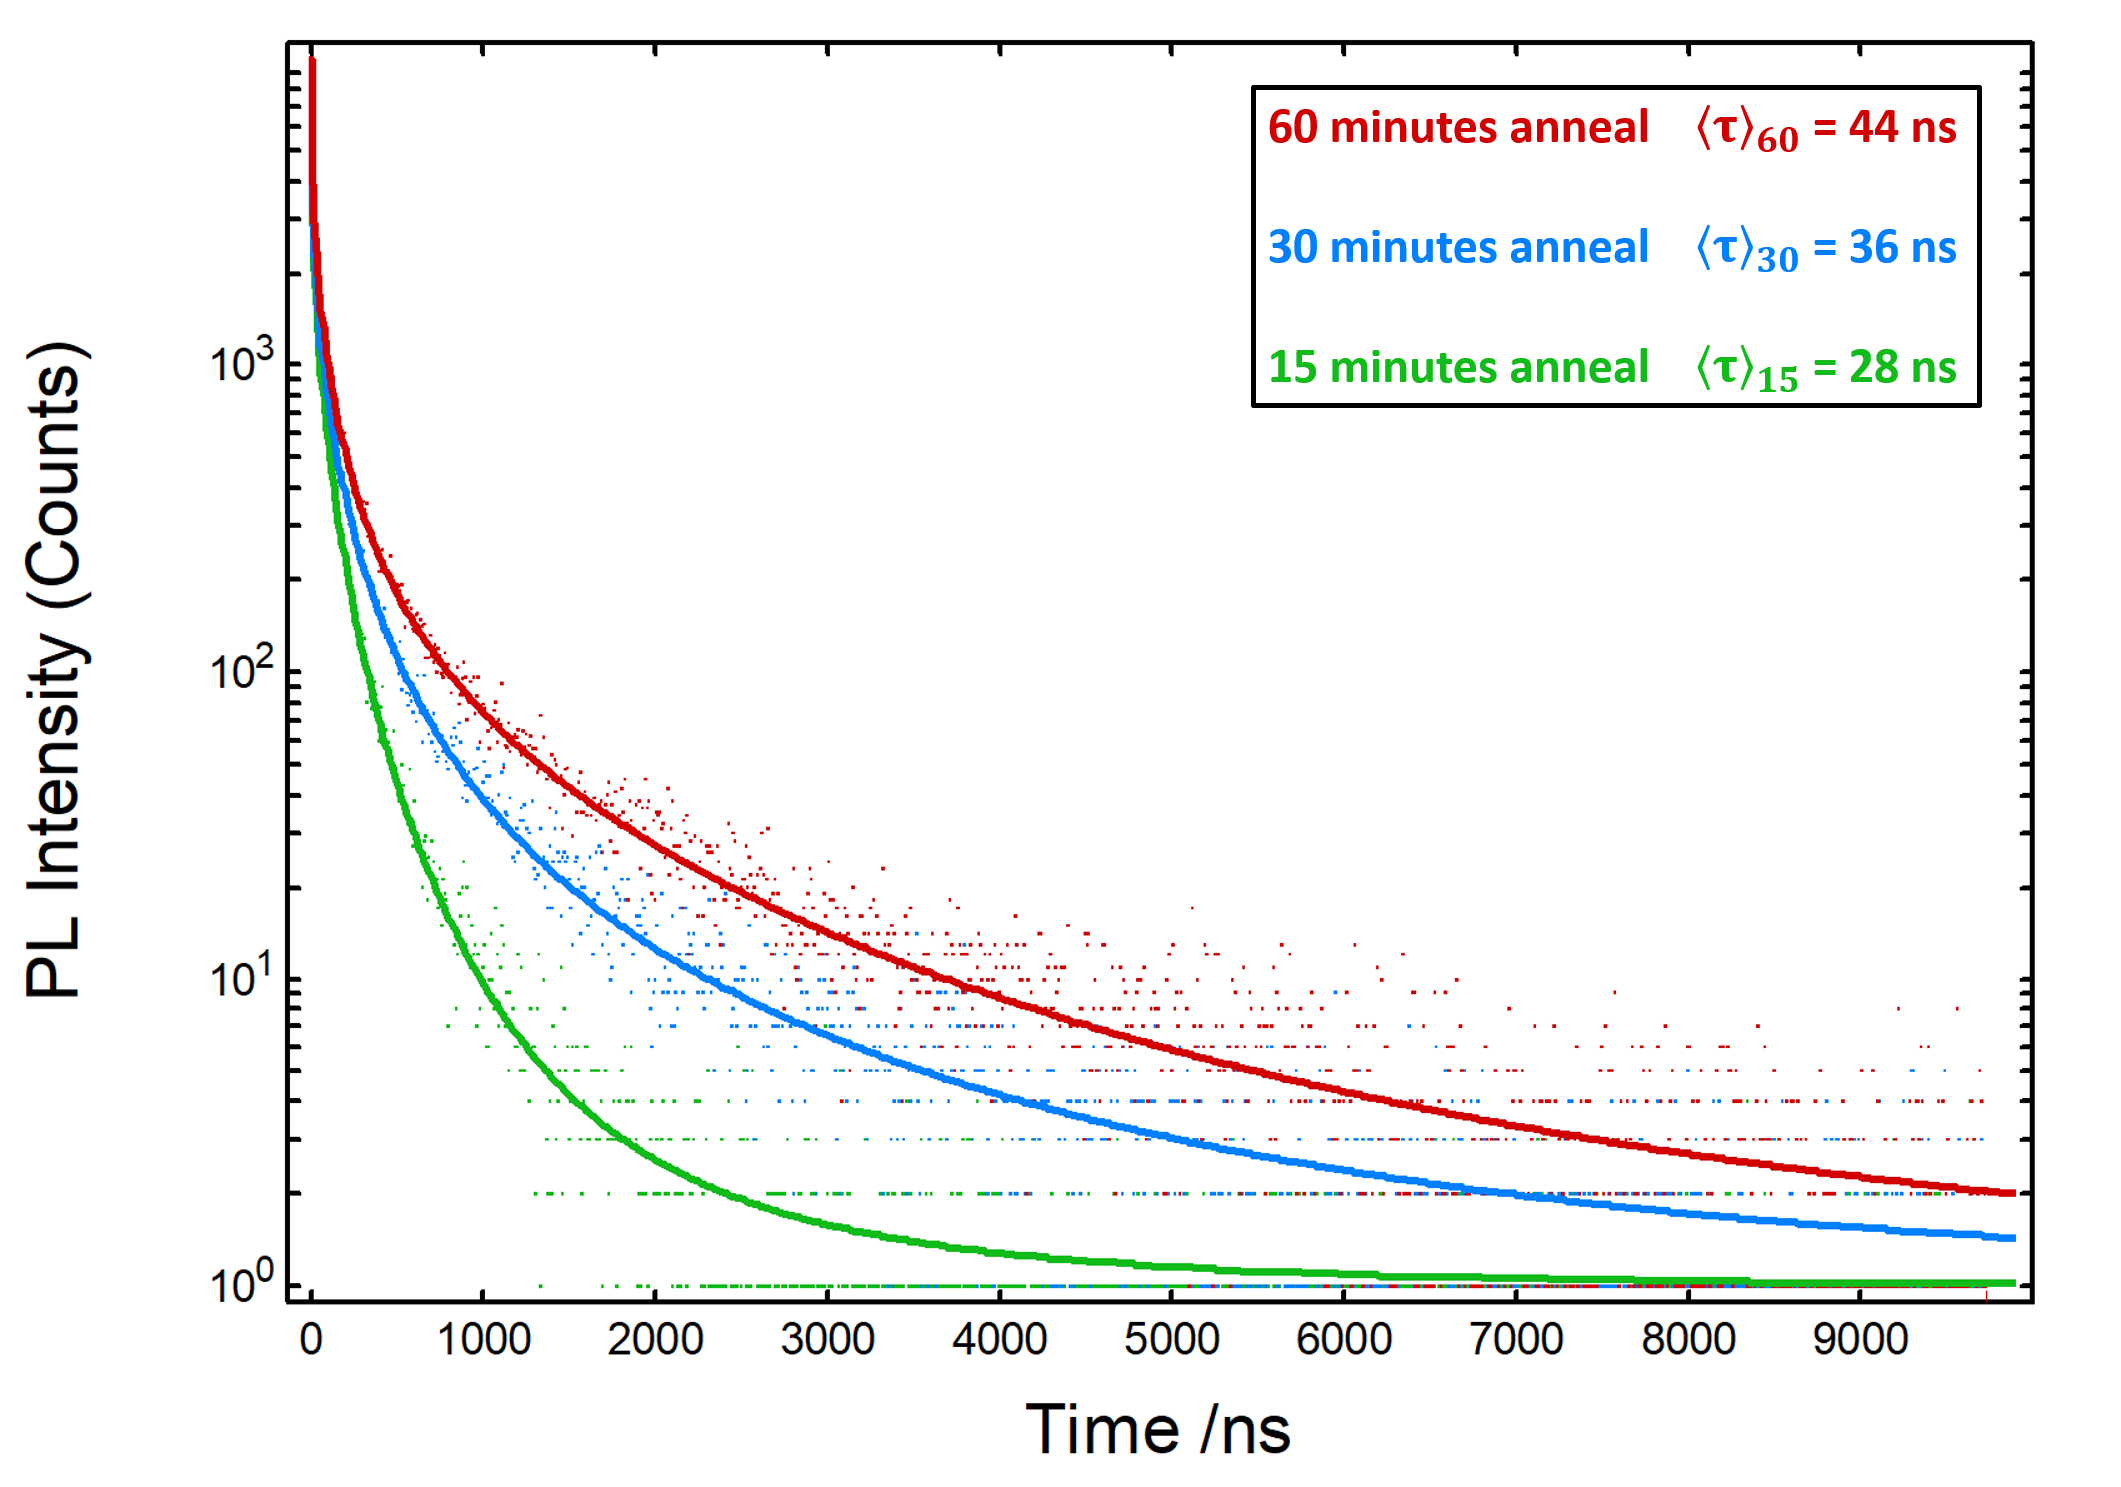 Figure 1: Photoluminescence decays of three MAPI perovskite thin films that were annealed for 15, 30, and 60 min. Excitation source = EPL-405 pulsed diode laser, Rep Rate = 100 kHz, λem = 780 nm, Δλem = 10 nm.